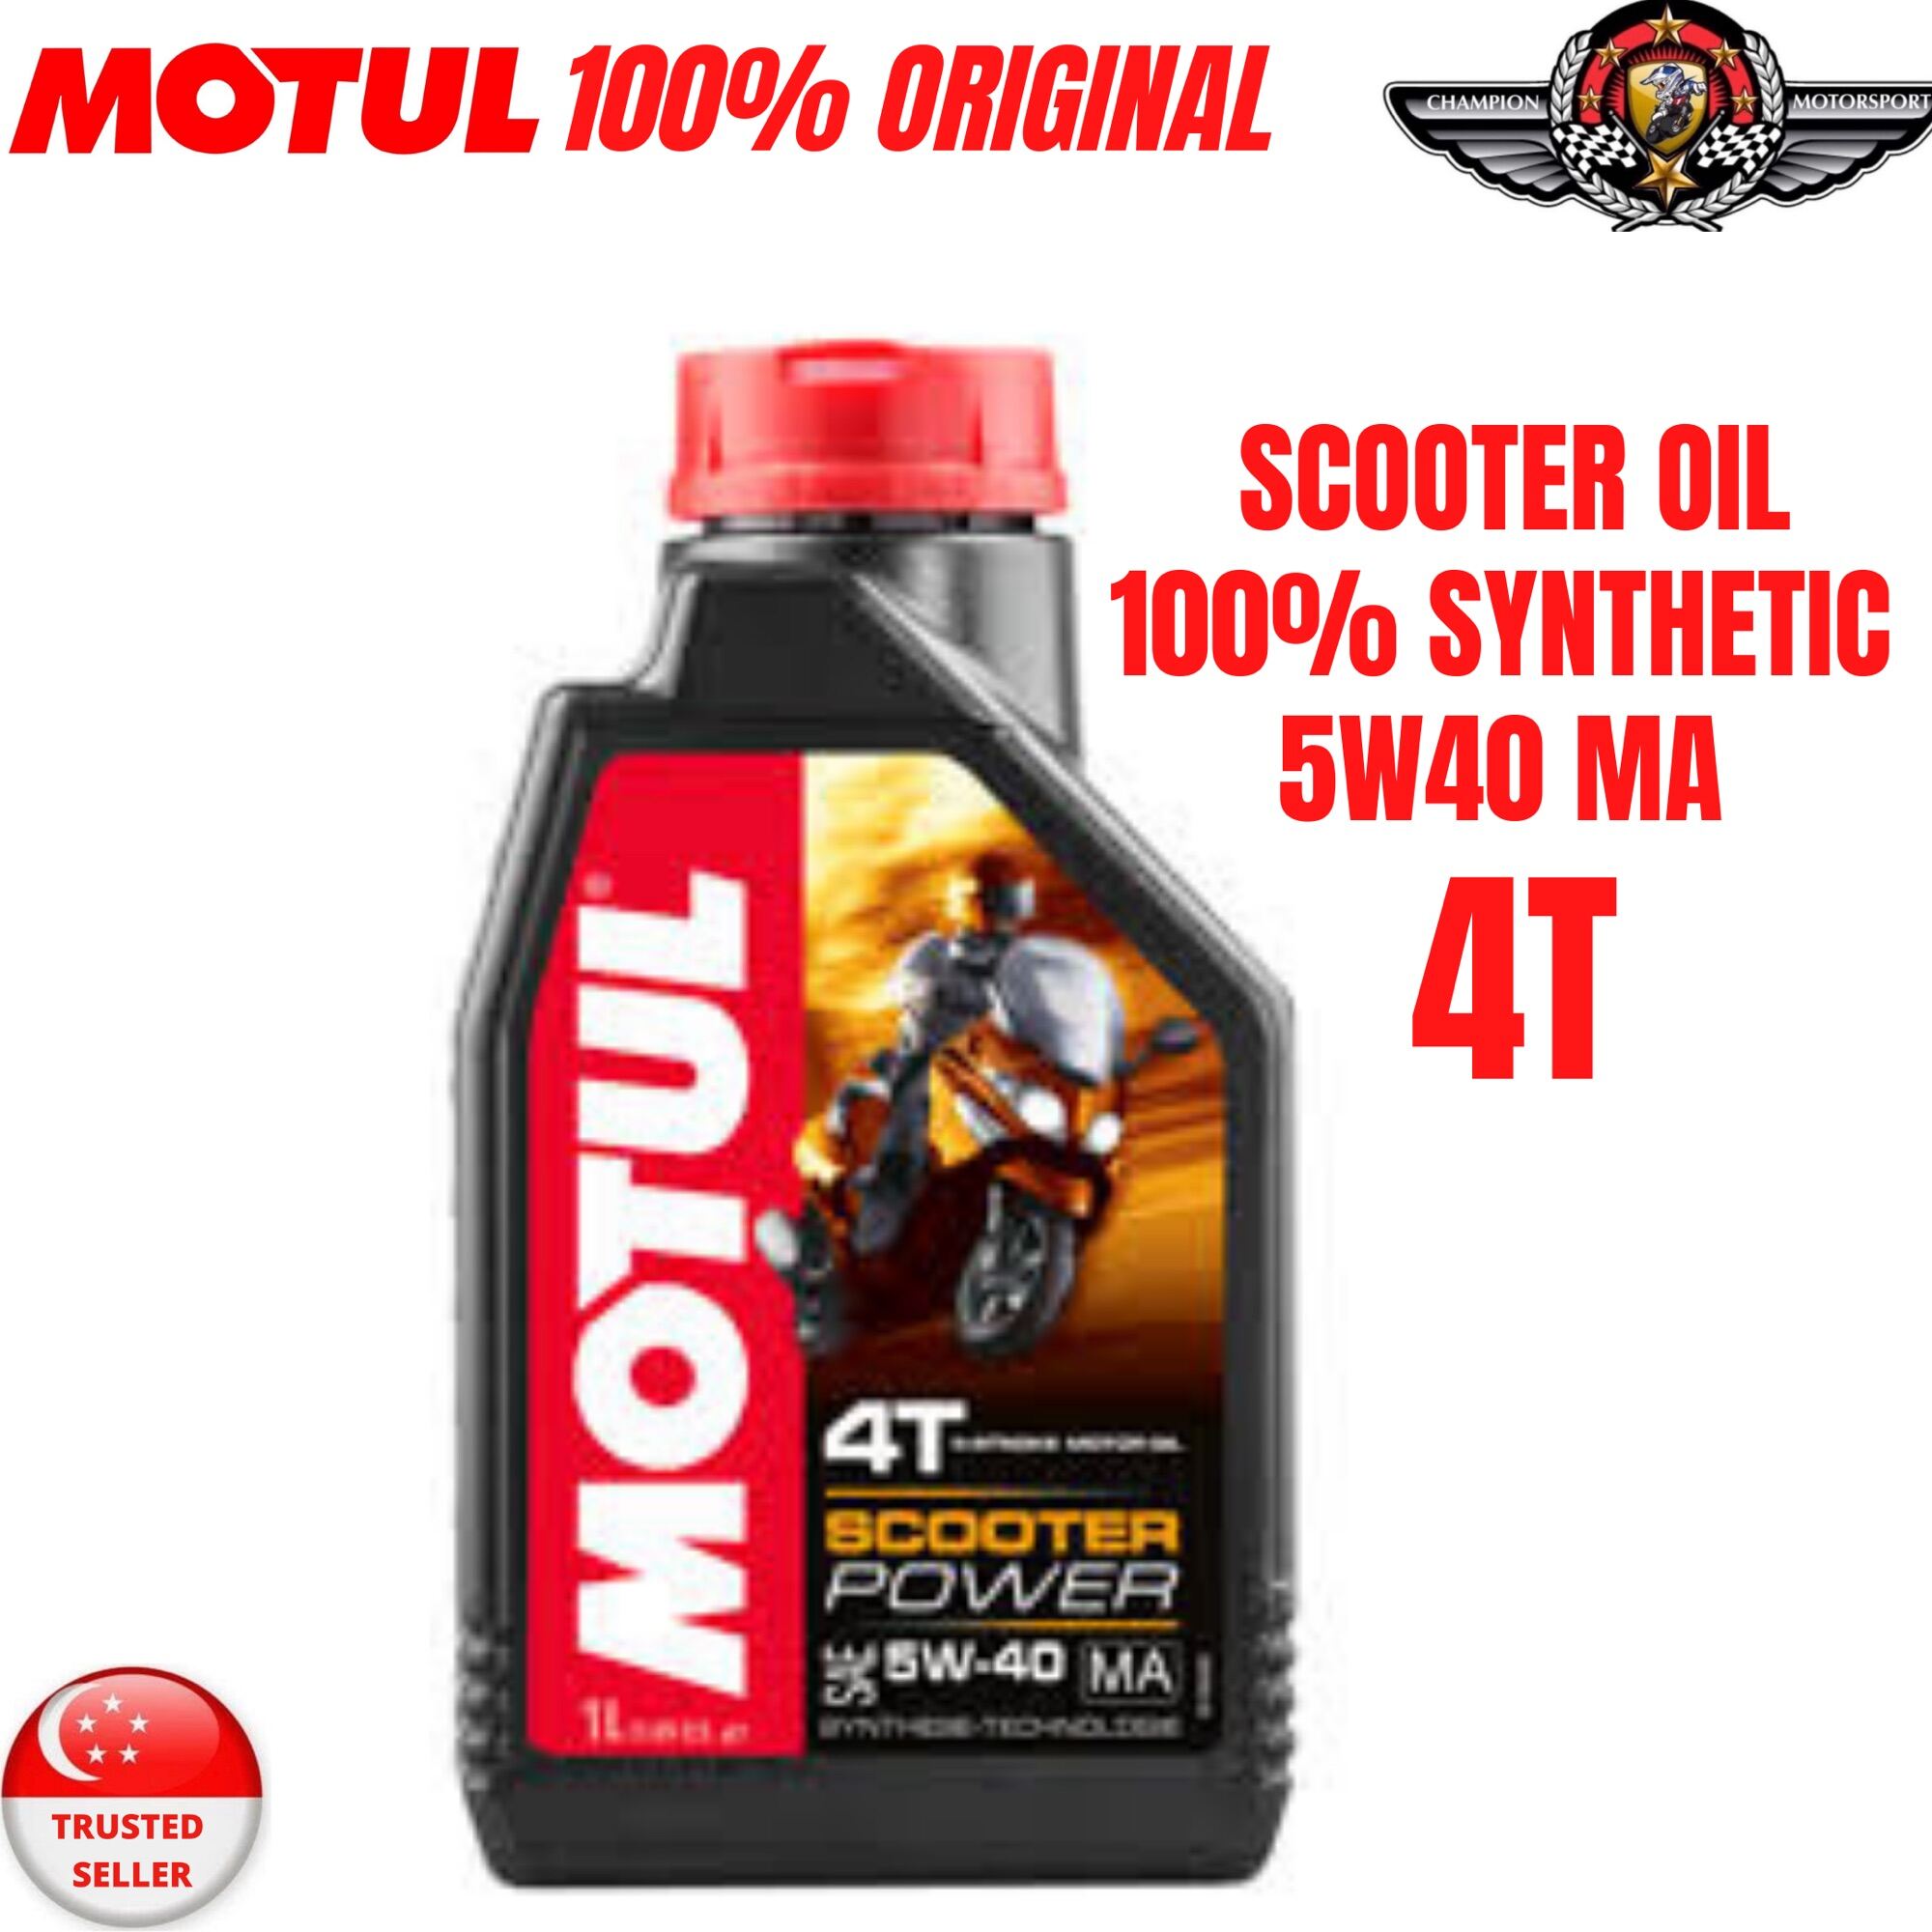 MOTUL SCOOTER POWER 4T 10W-30 MB/ 5W-40 MA FULLY SYNTHETIC ENGINE OIL 1L |  Lazada Singapore